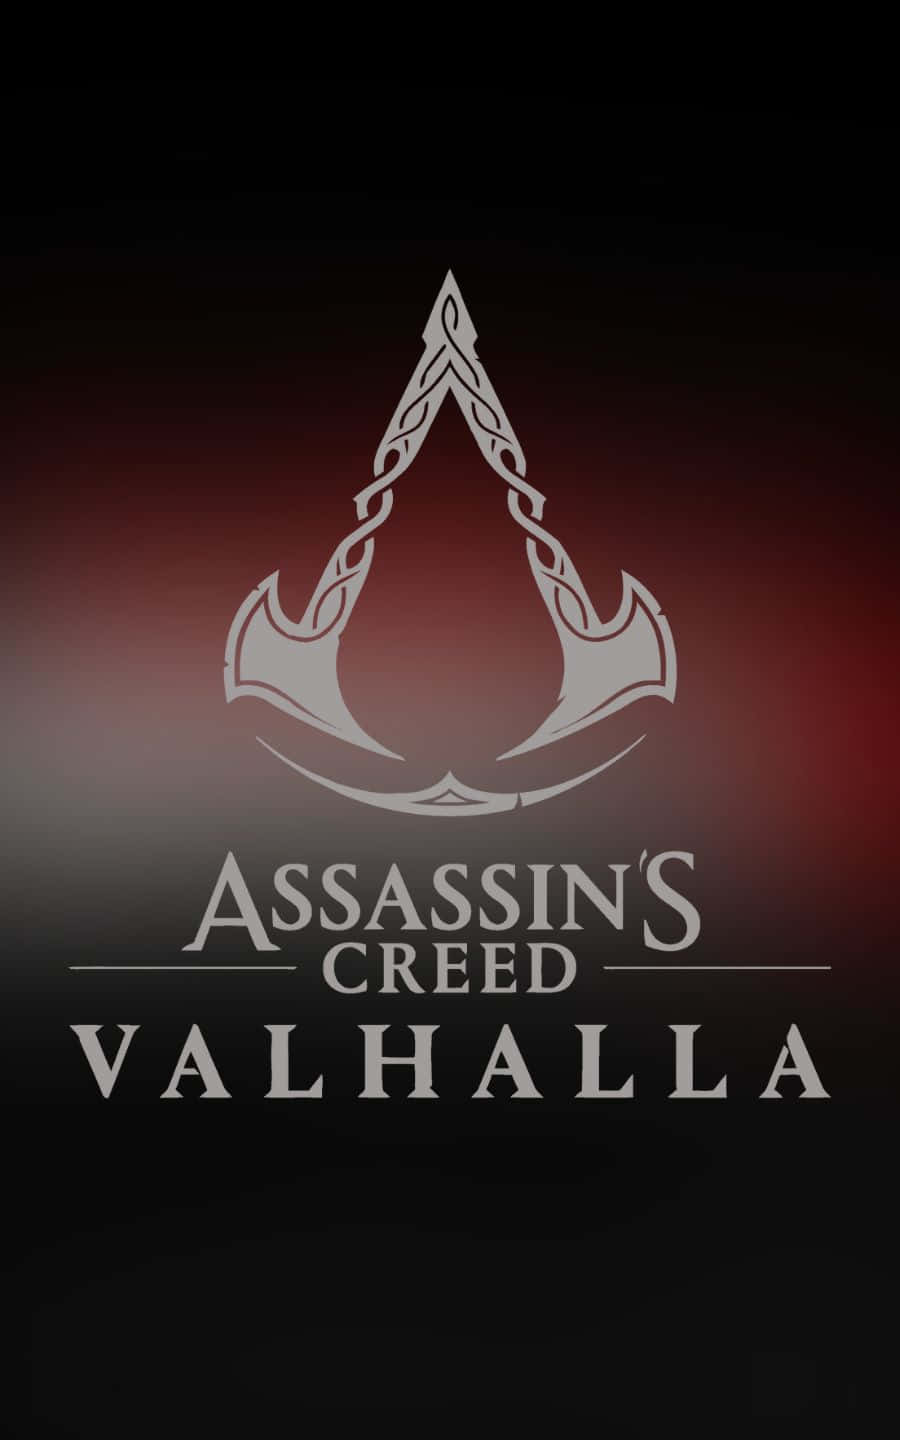 Red And Black 1440p Assassin's Creed Valhalla Background